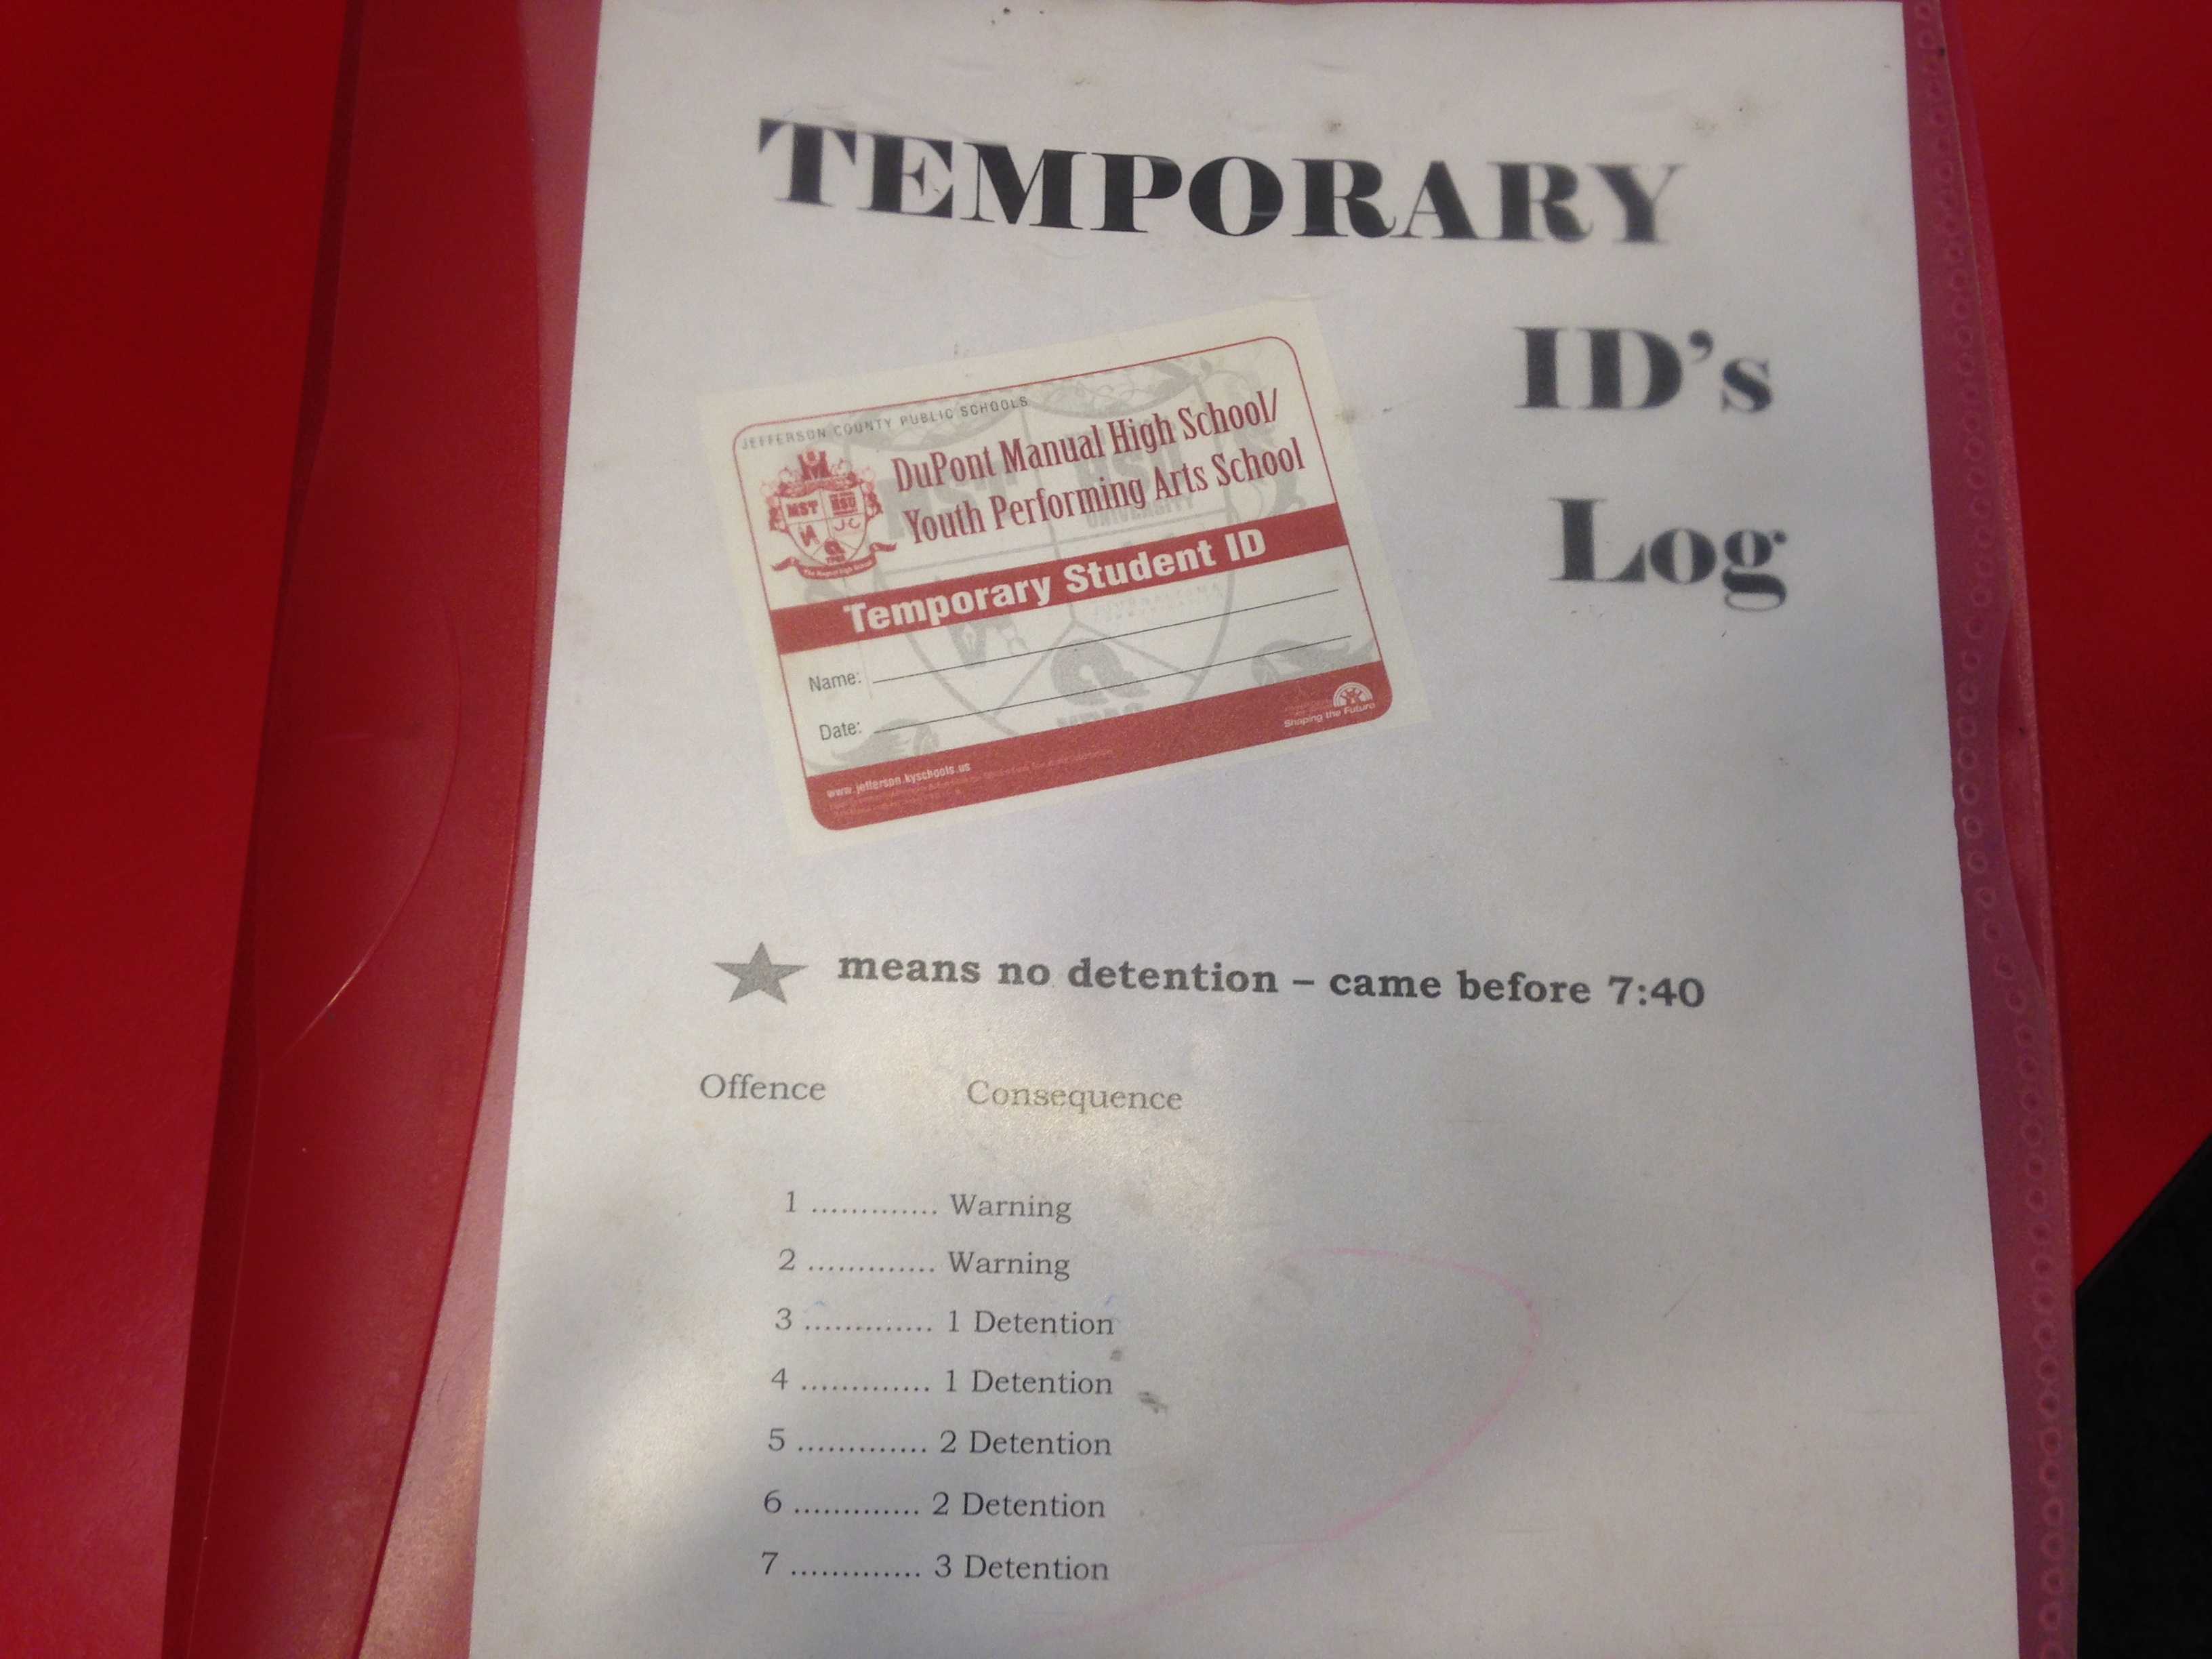 The administrations temporary ID log. Photo by Hunter Hartlage.